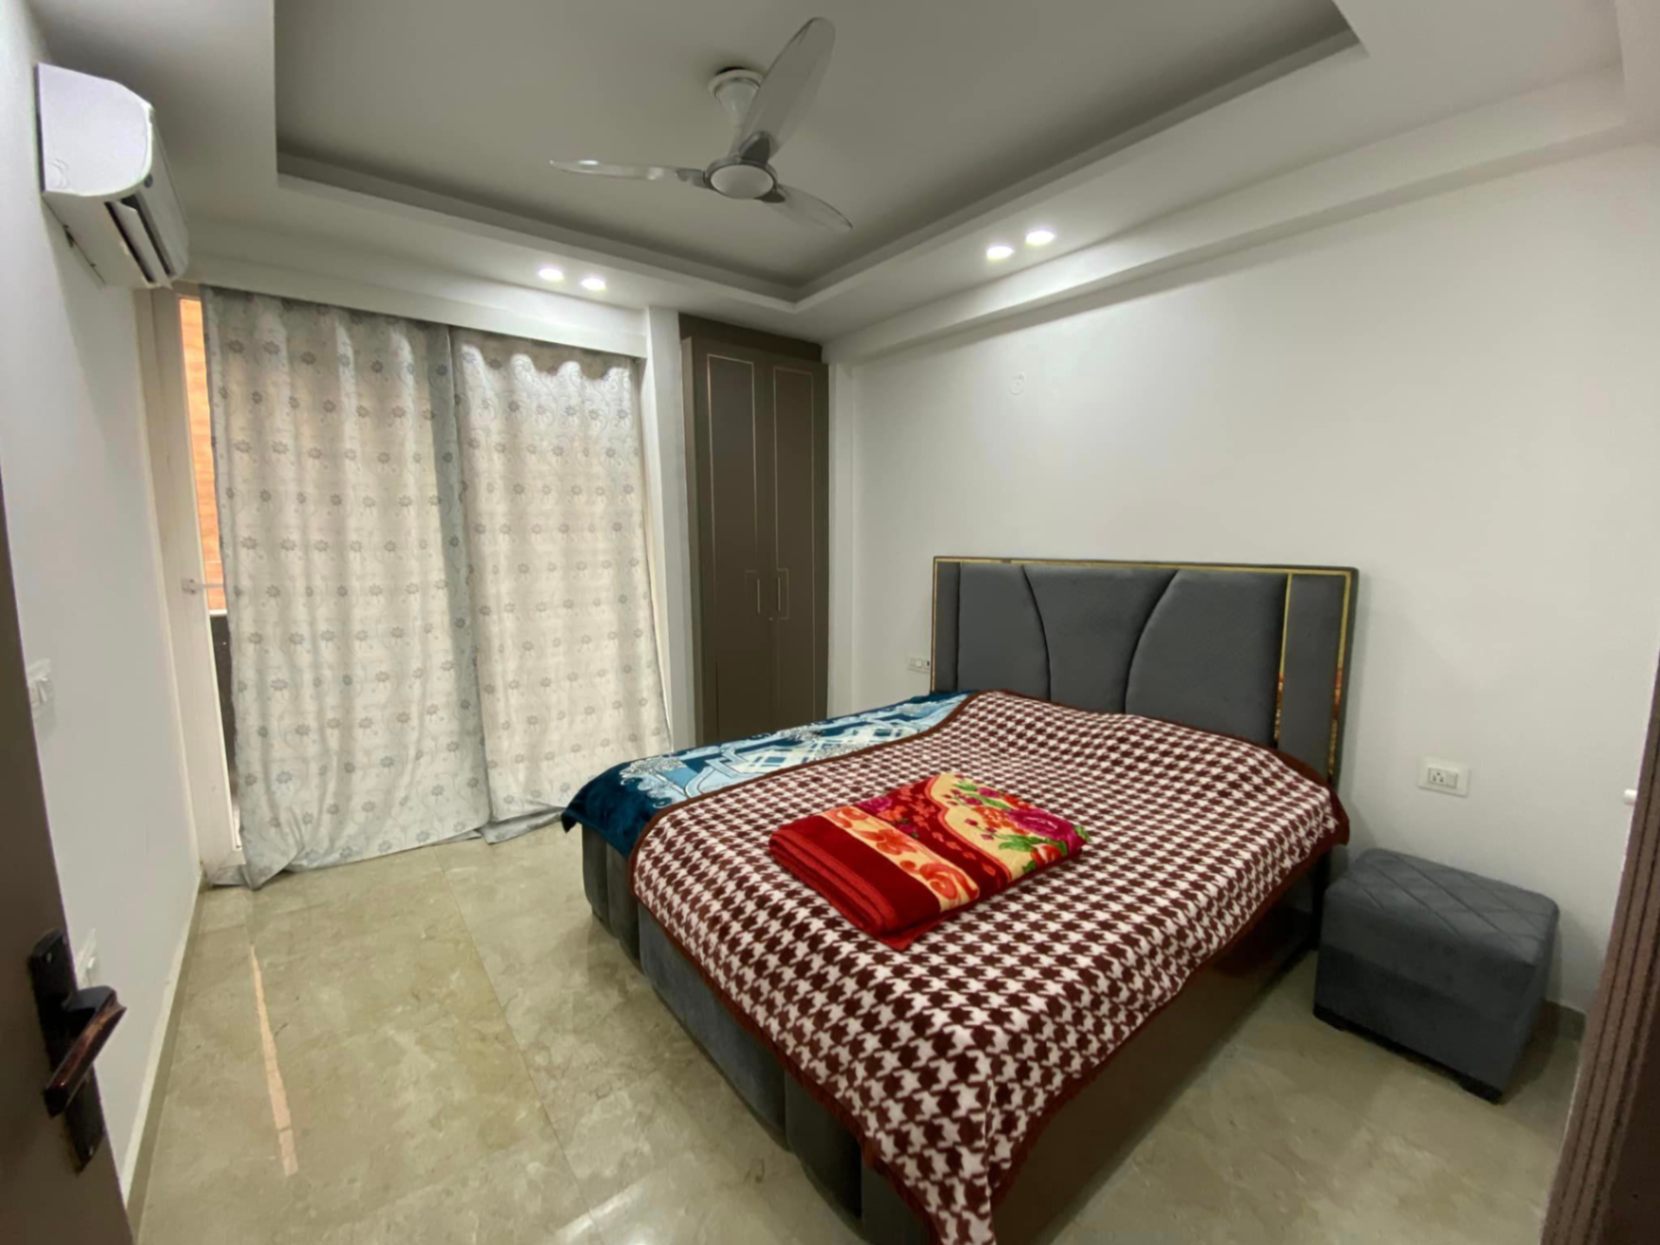 3 Bed/ 3 Bath Rent Apartment/ Flat, Furnished for rent @Chatterpur enclave phase 2 New Delhi